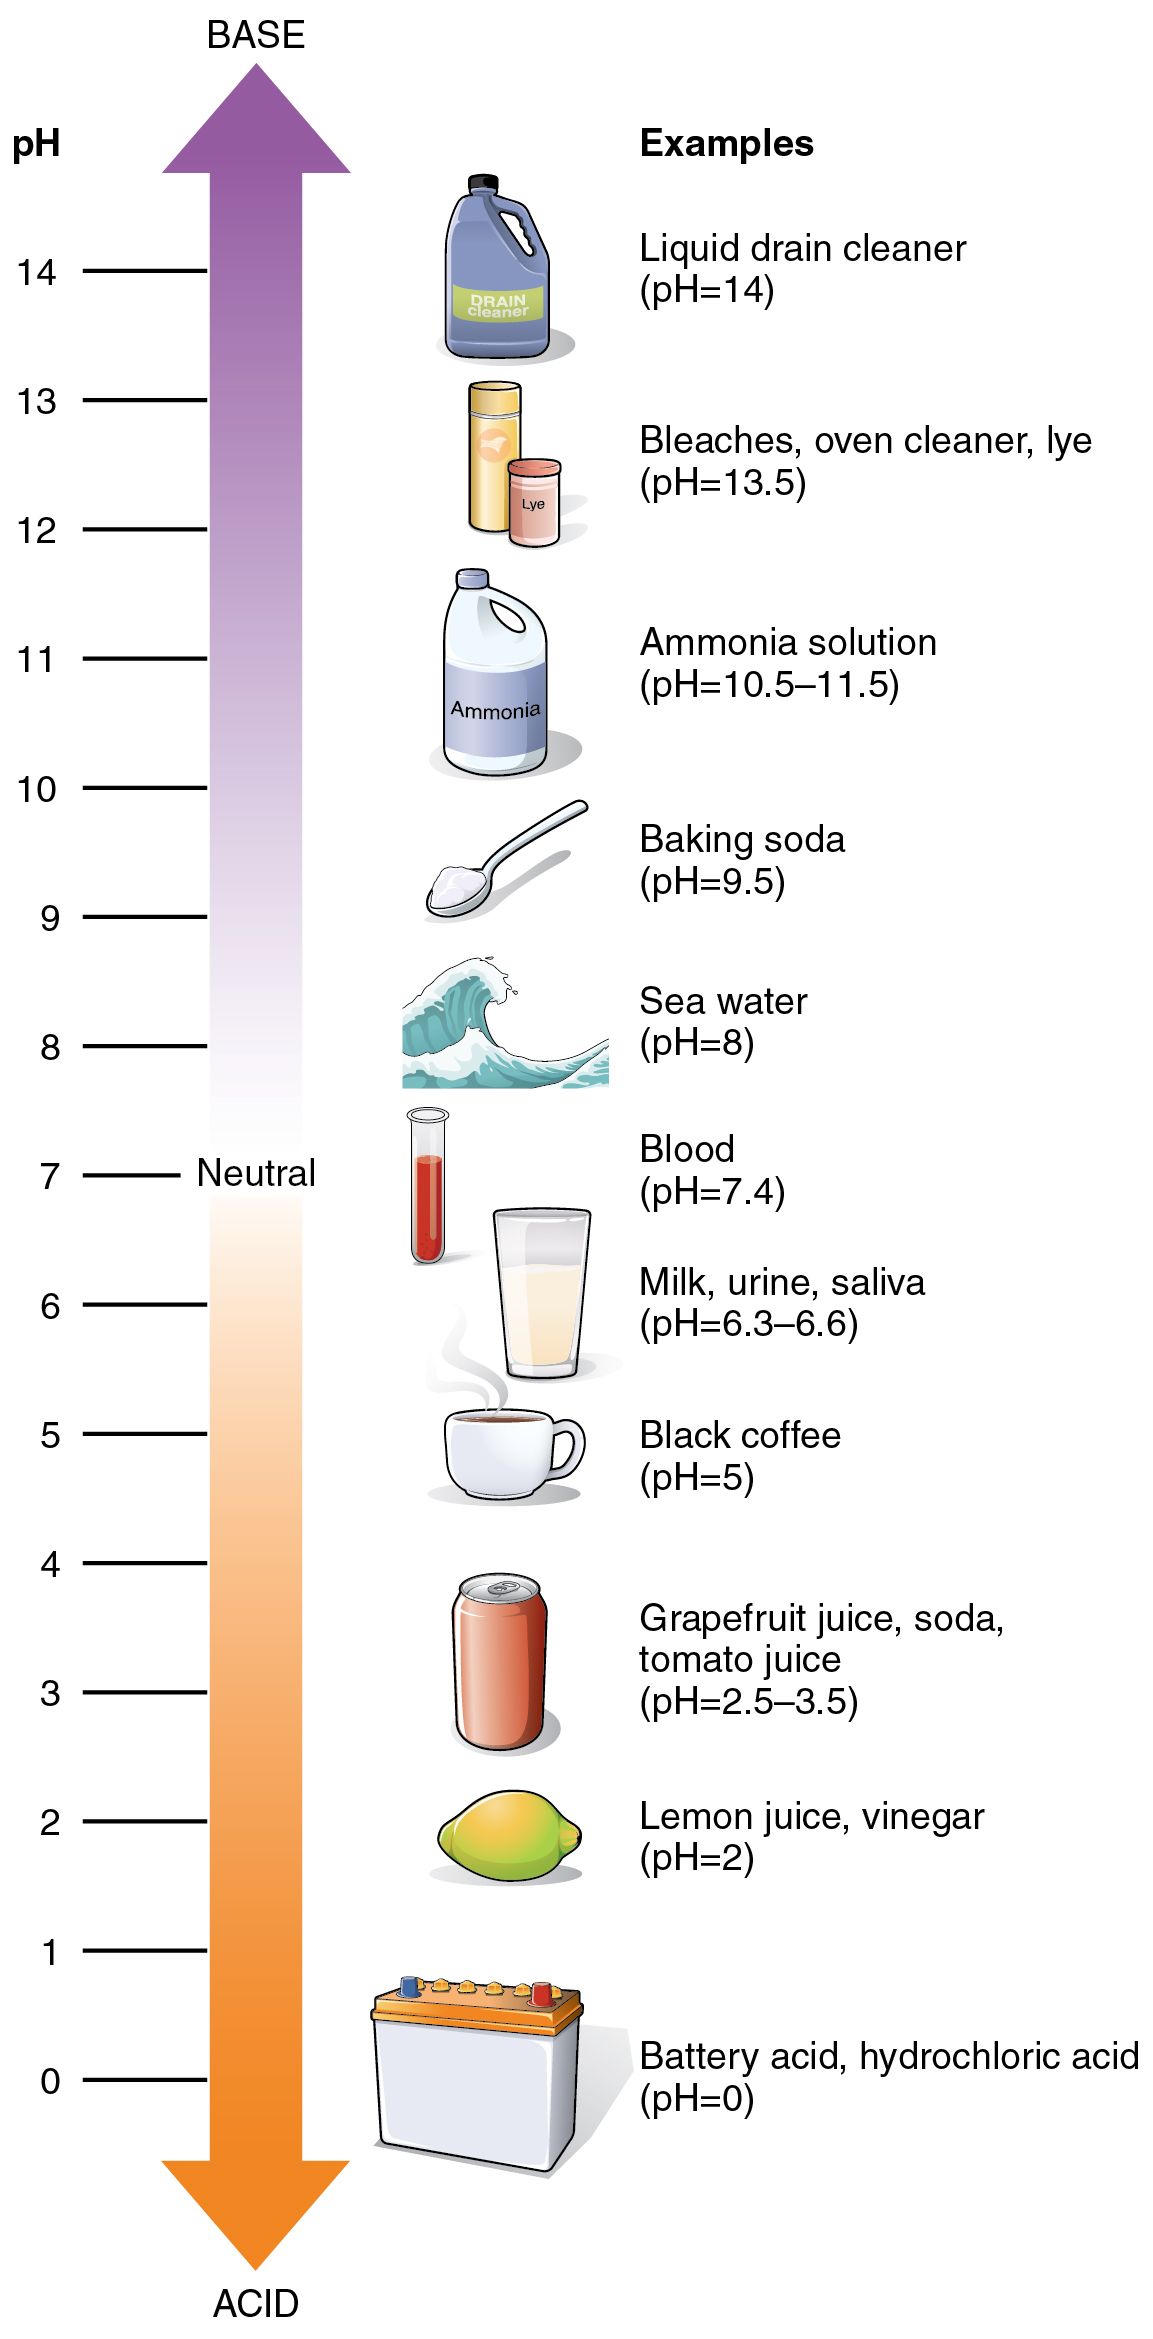 This figure shows a vertical arrow with the top half showing the basic scale and the bottom half showing the acidic scale. Different chemicals and their pH are also shown.